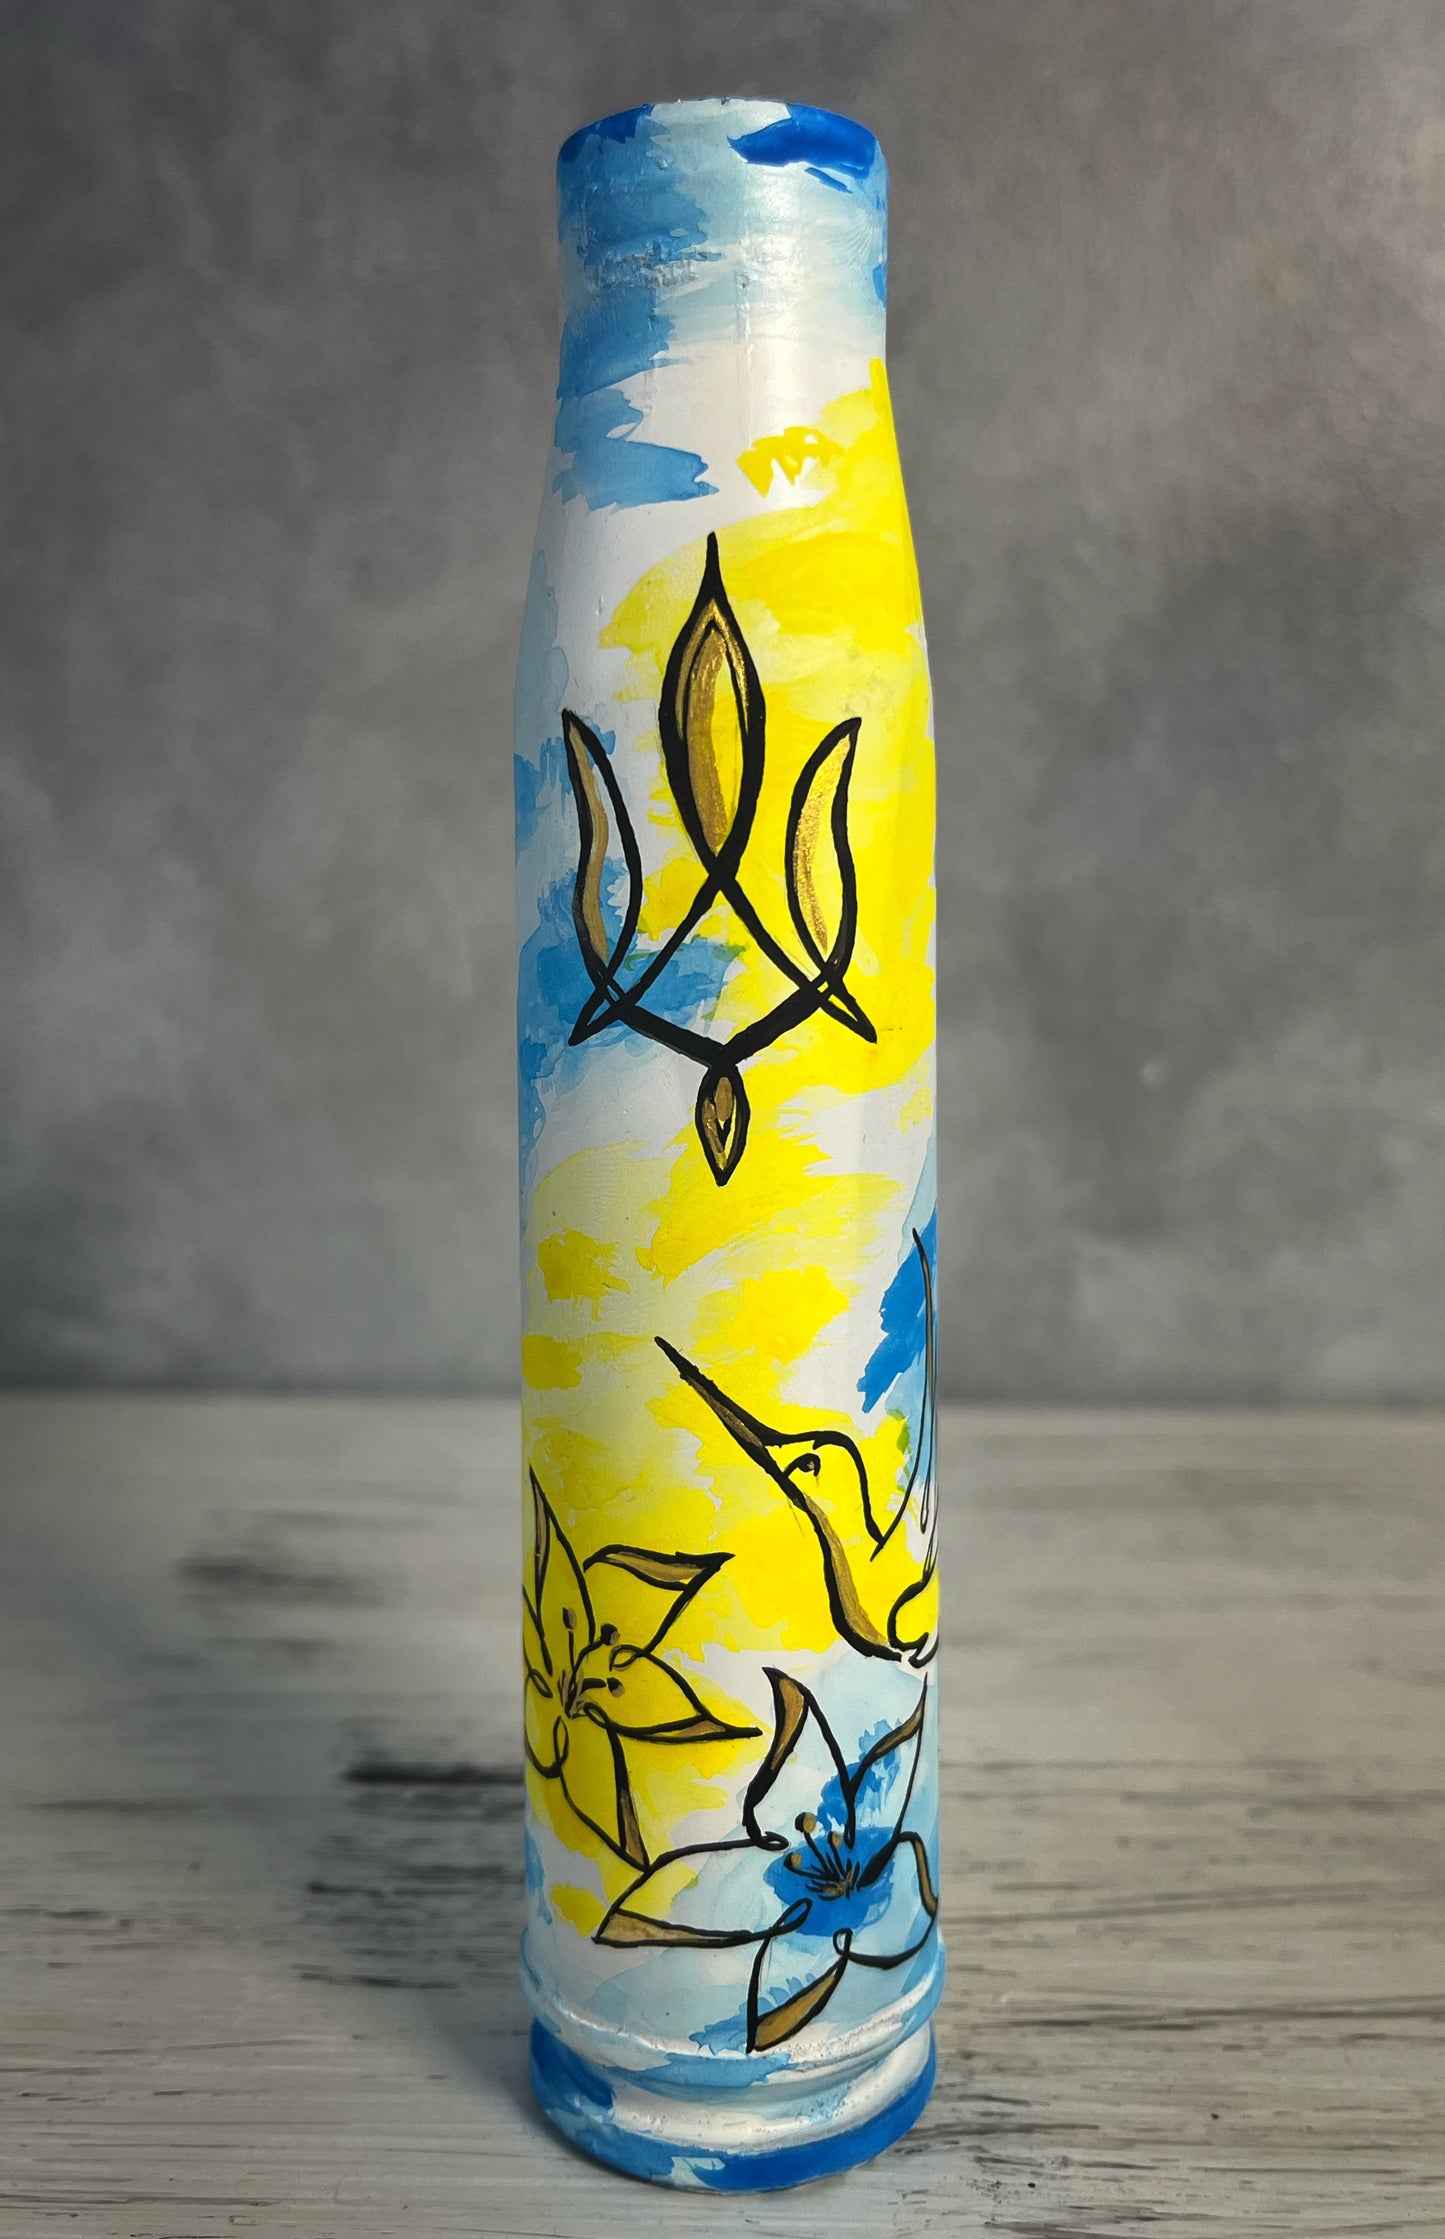 30mm shell with drawing in Ukrainian flag colors. (#183).